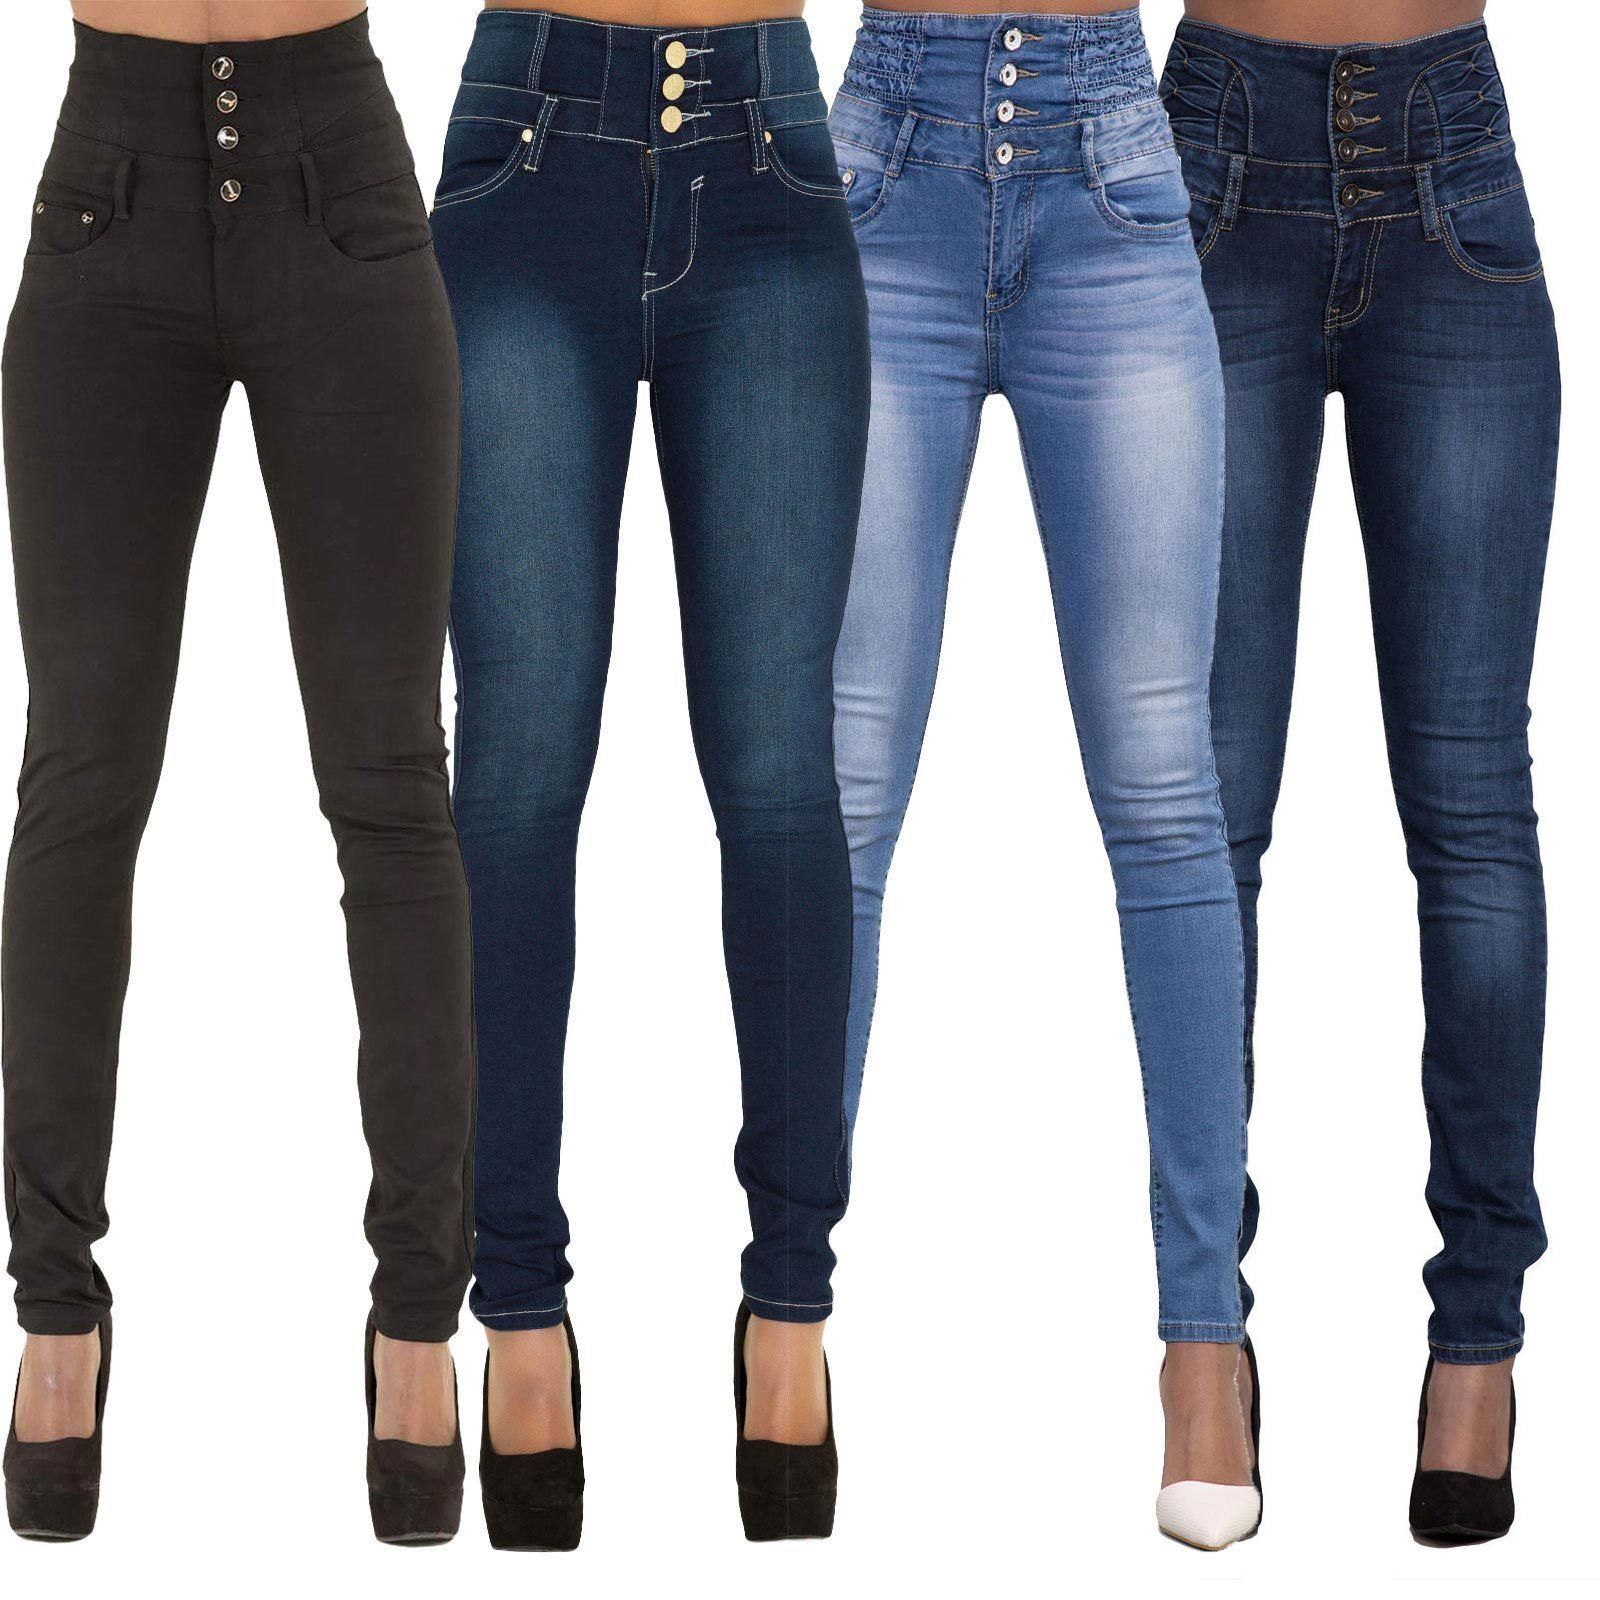 types of jeans pants for ladies